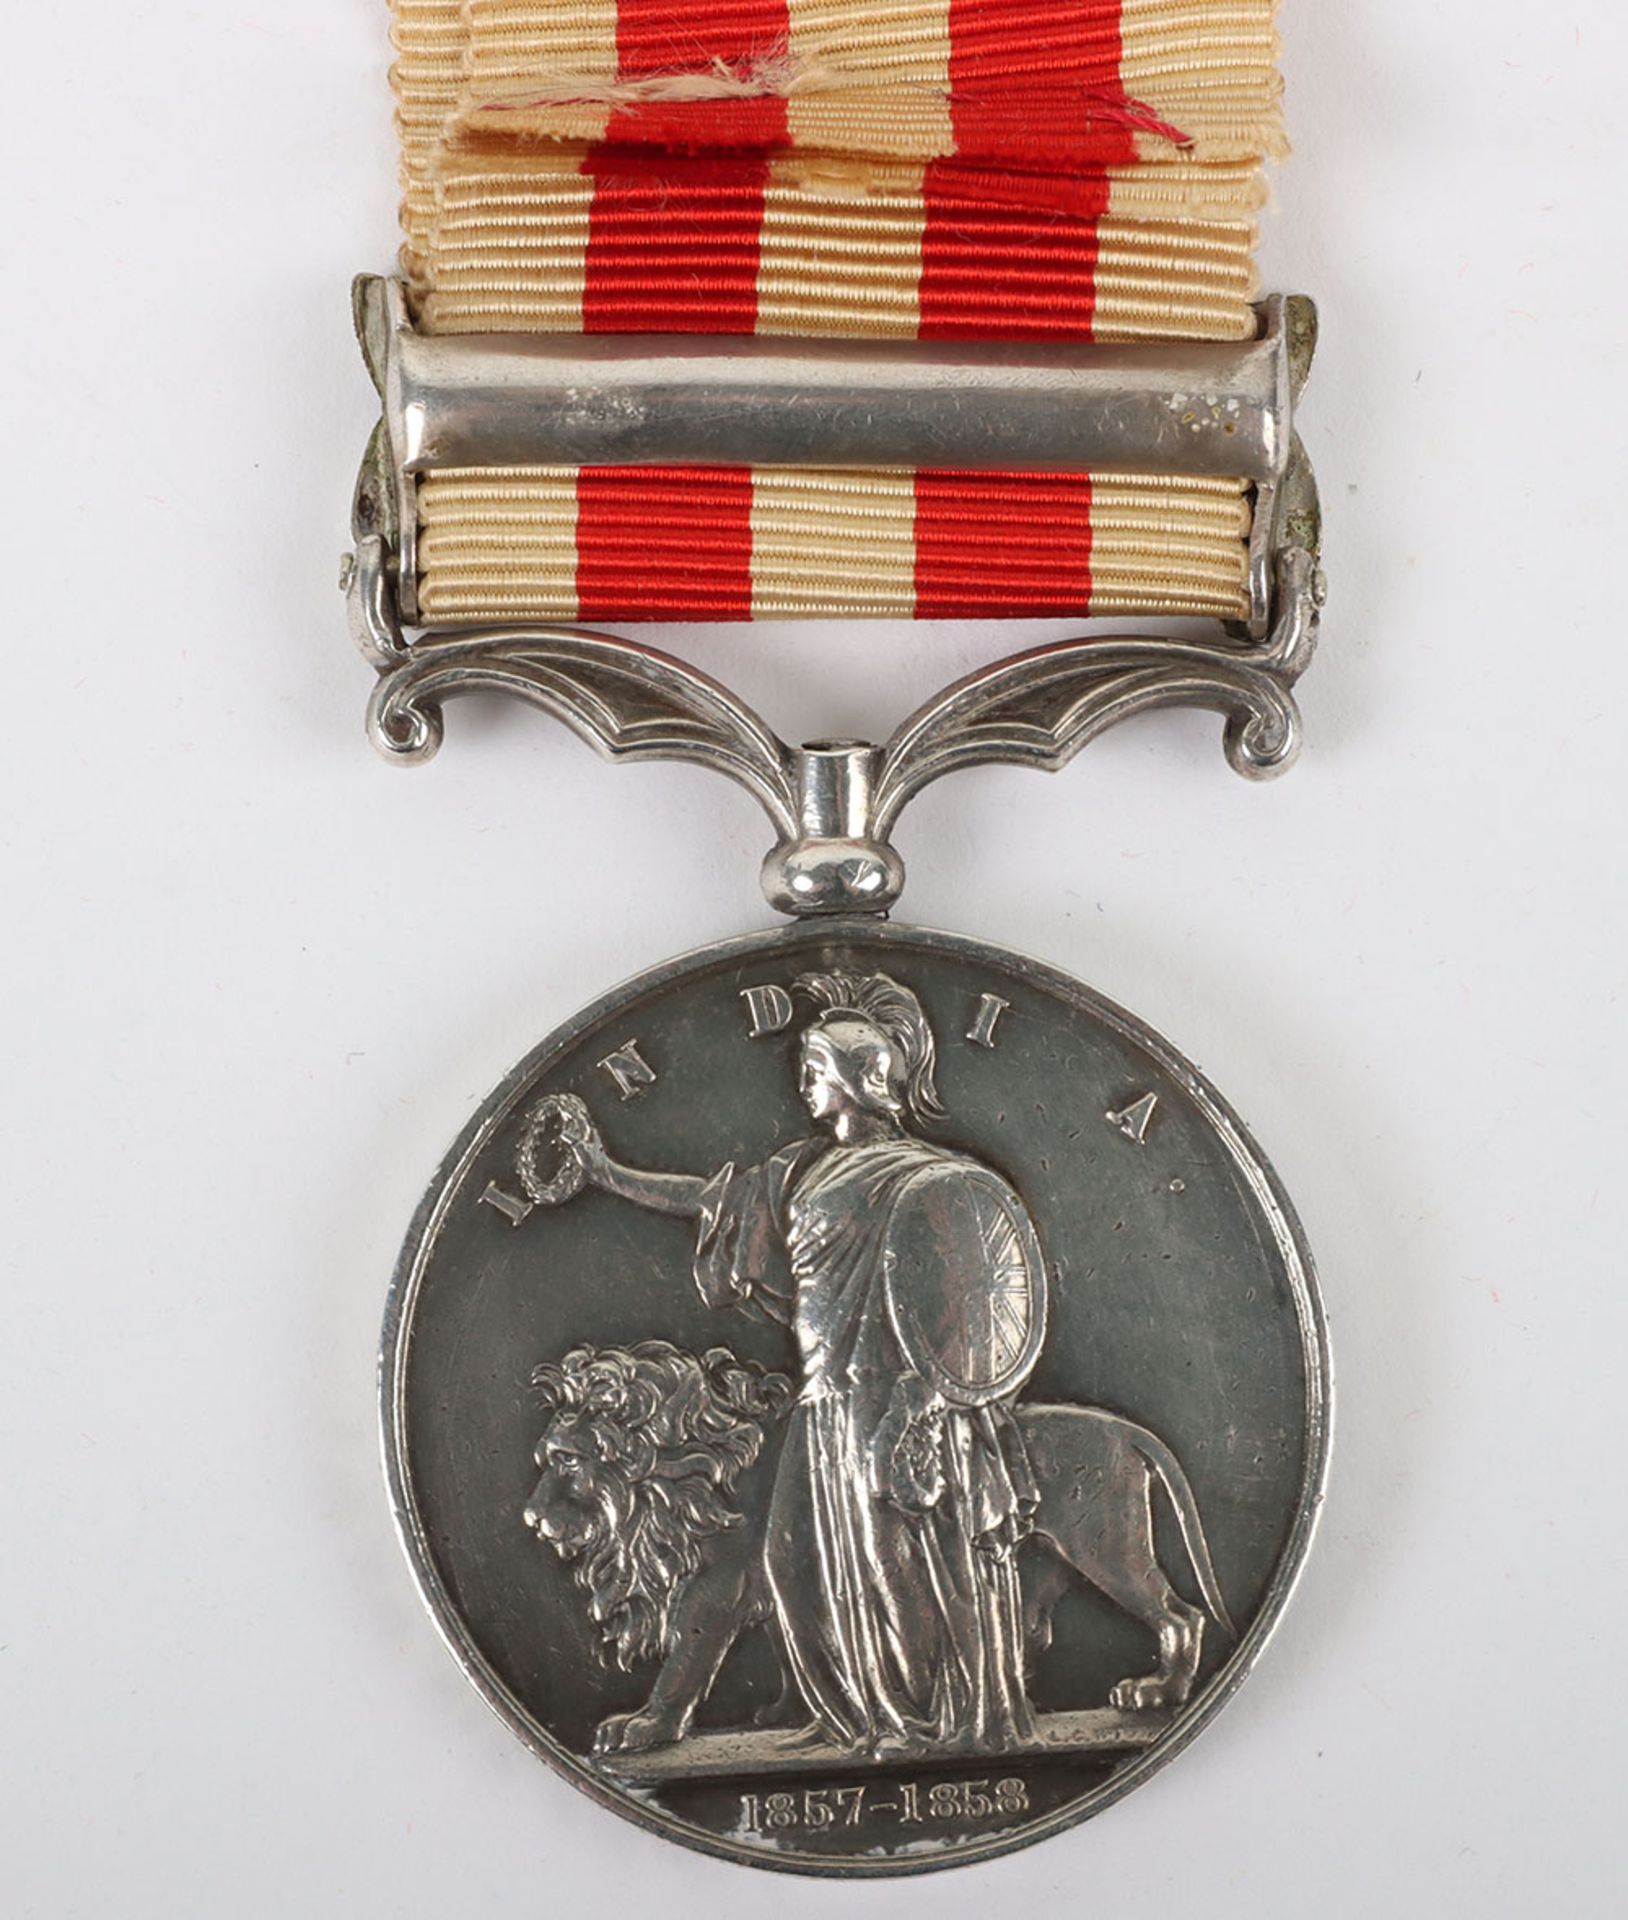 Indian Mutiny Medal Awarded to a Corporal of the 8th (Kings) Regiment Who Was Killed in Action Durin - Bild 2 aus 6